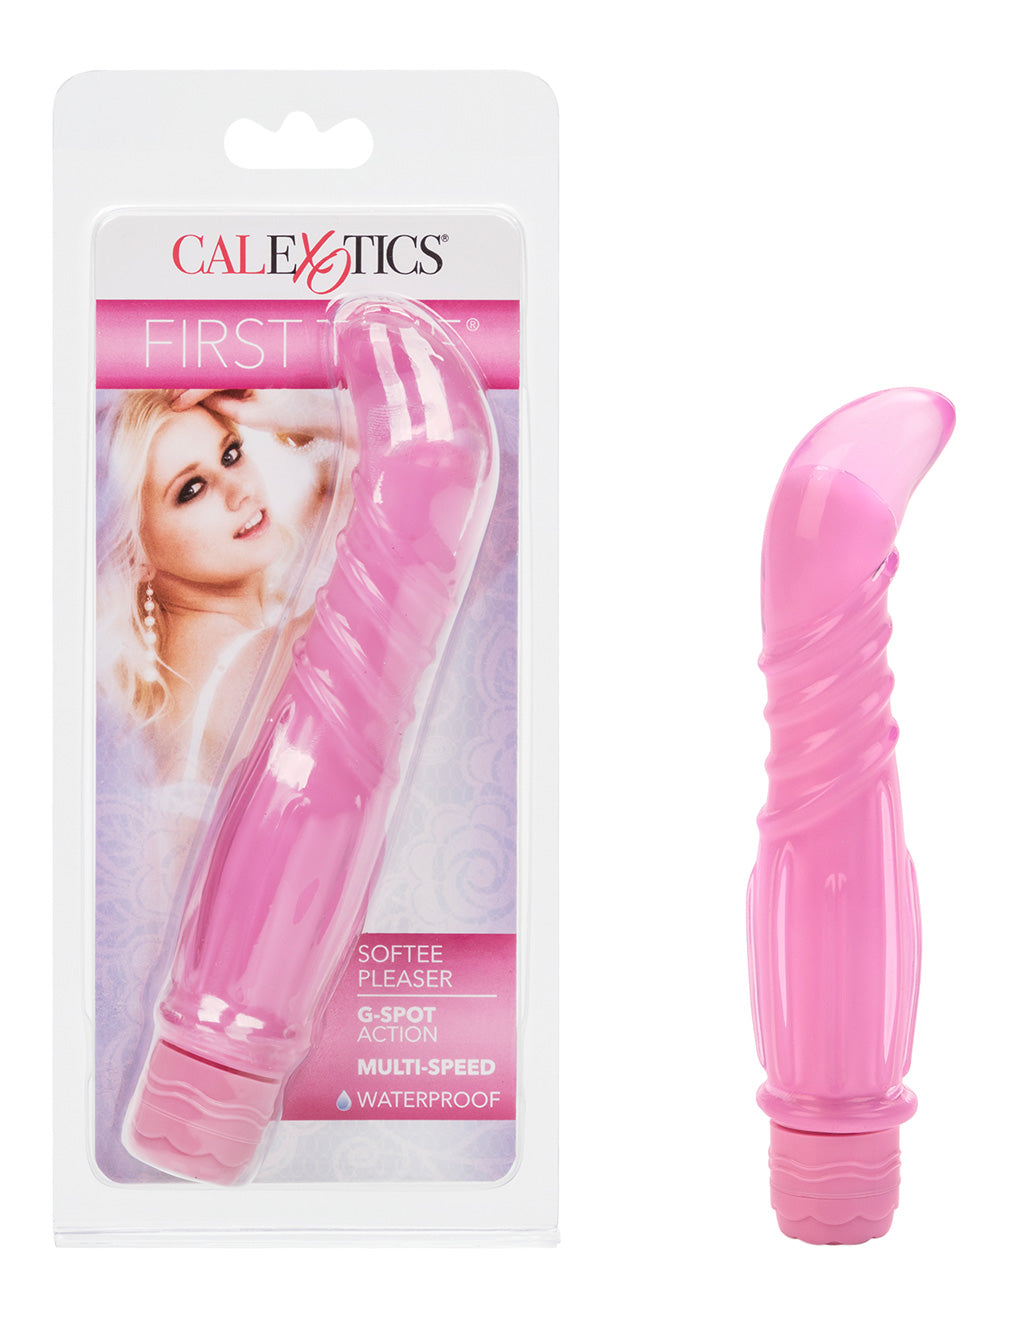 First Time Softee Pleaser G-spot Vibrator- Pink- Package